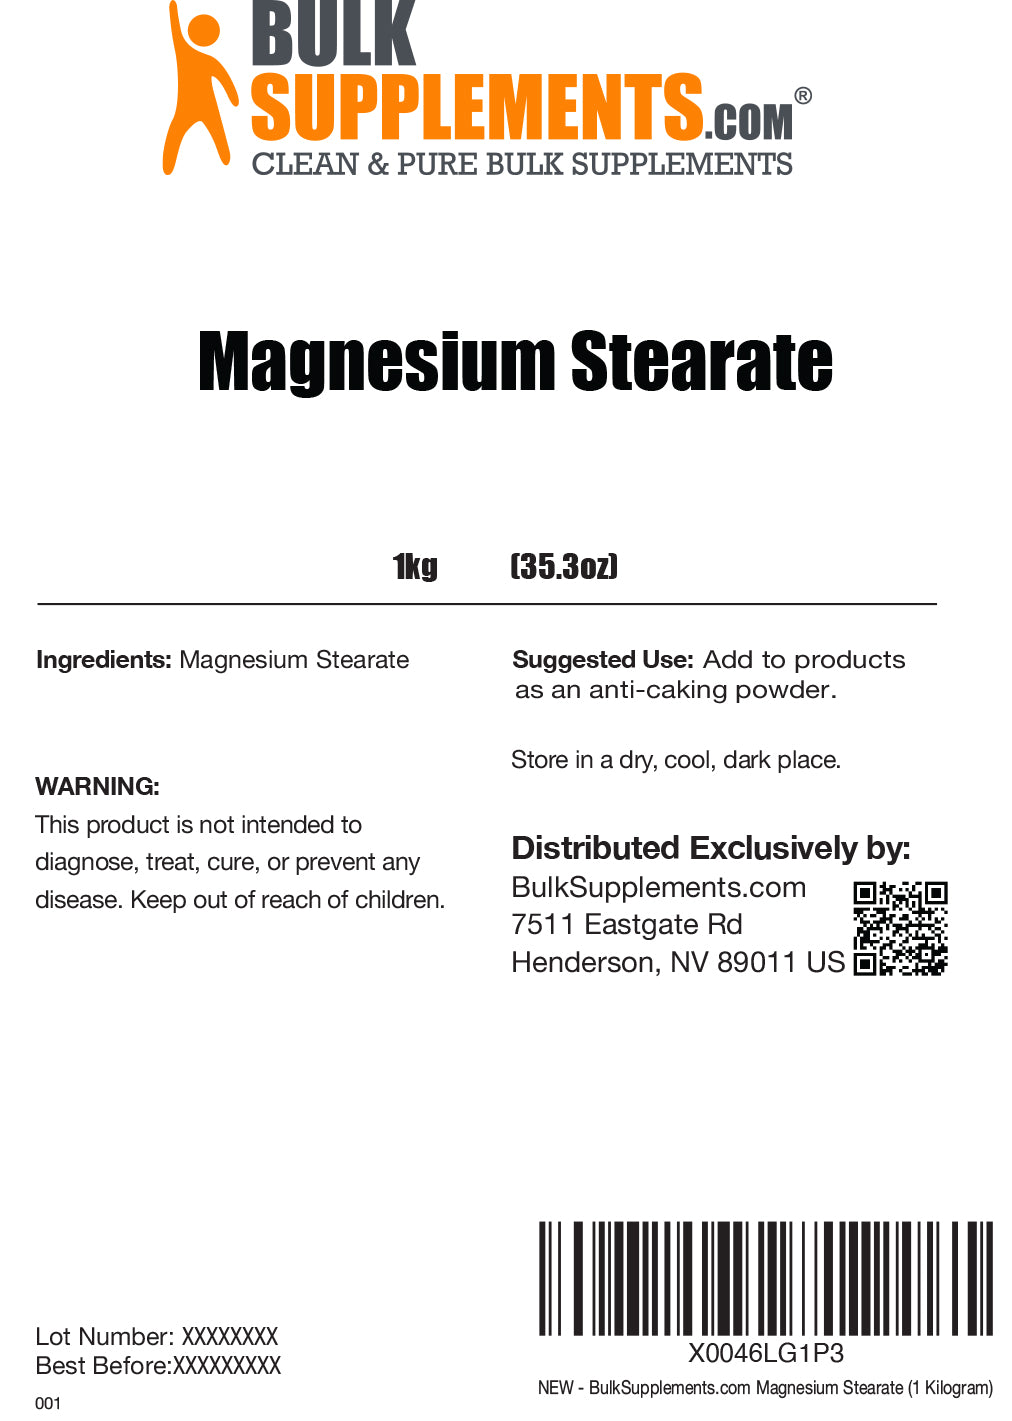 Magnesium stearate 100g label